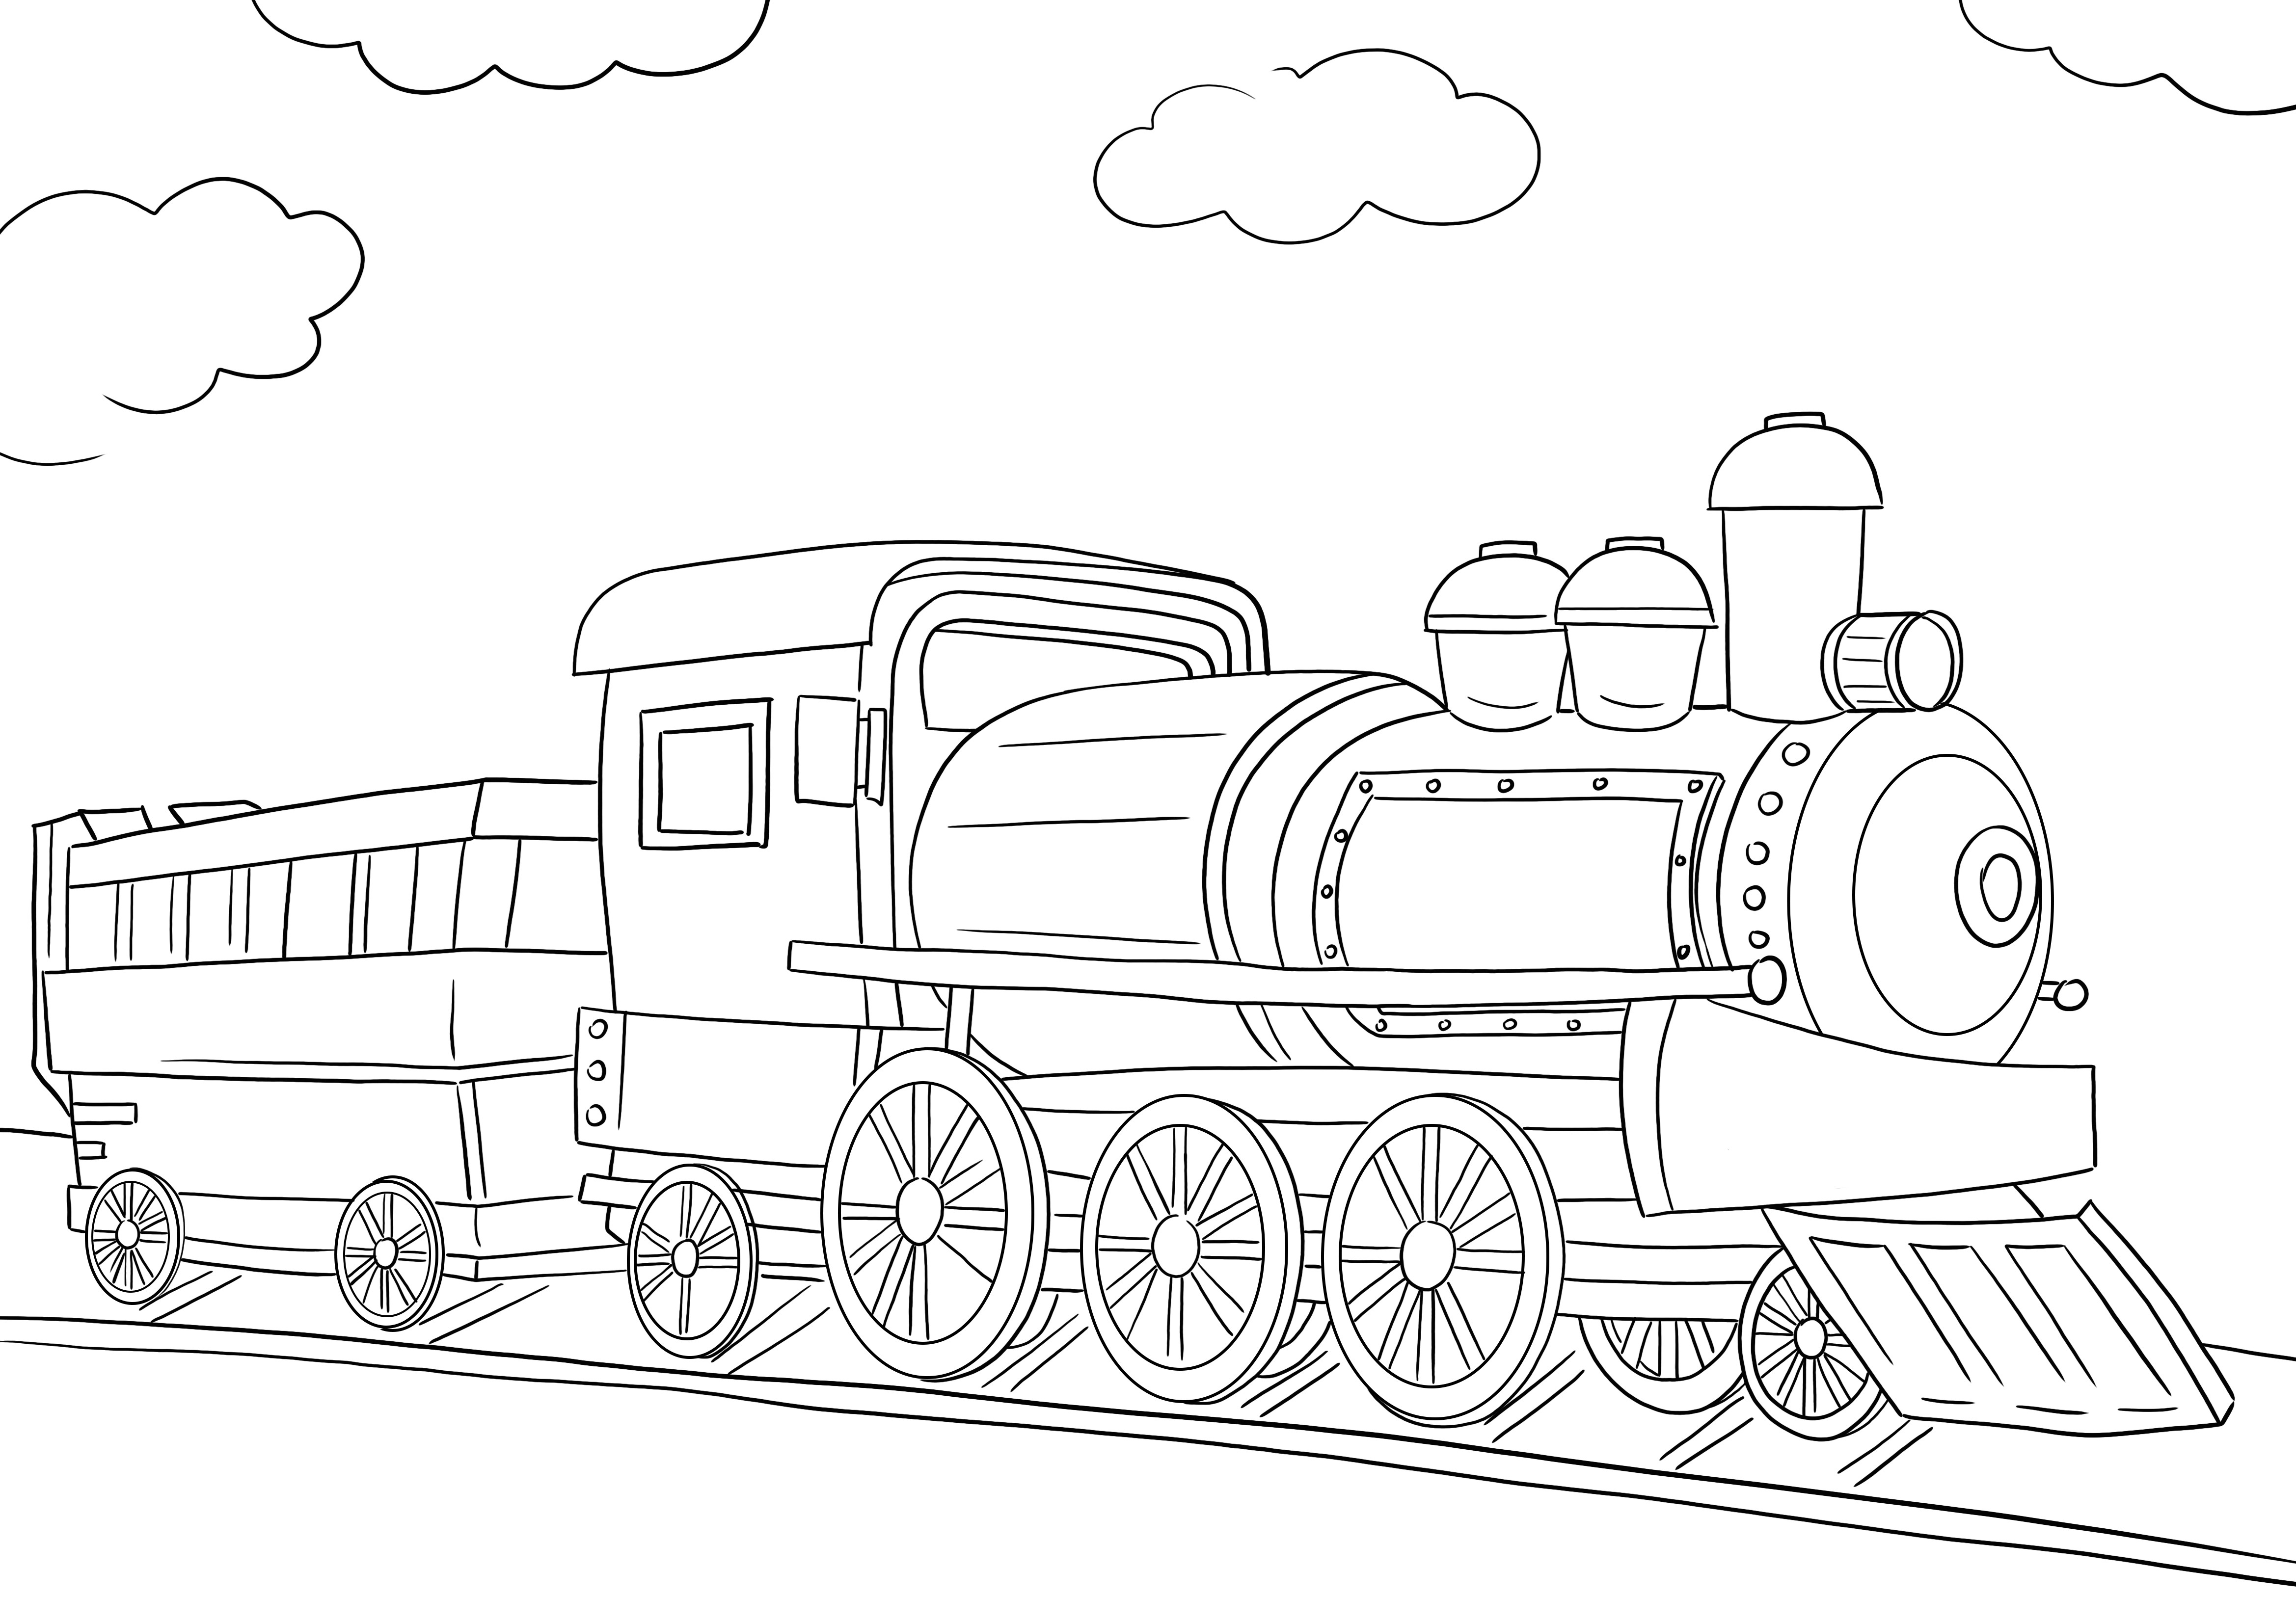 A free-to-use coloring image of a train's locomotive to print or download